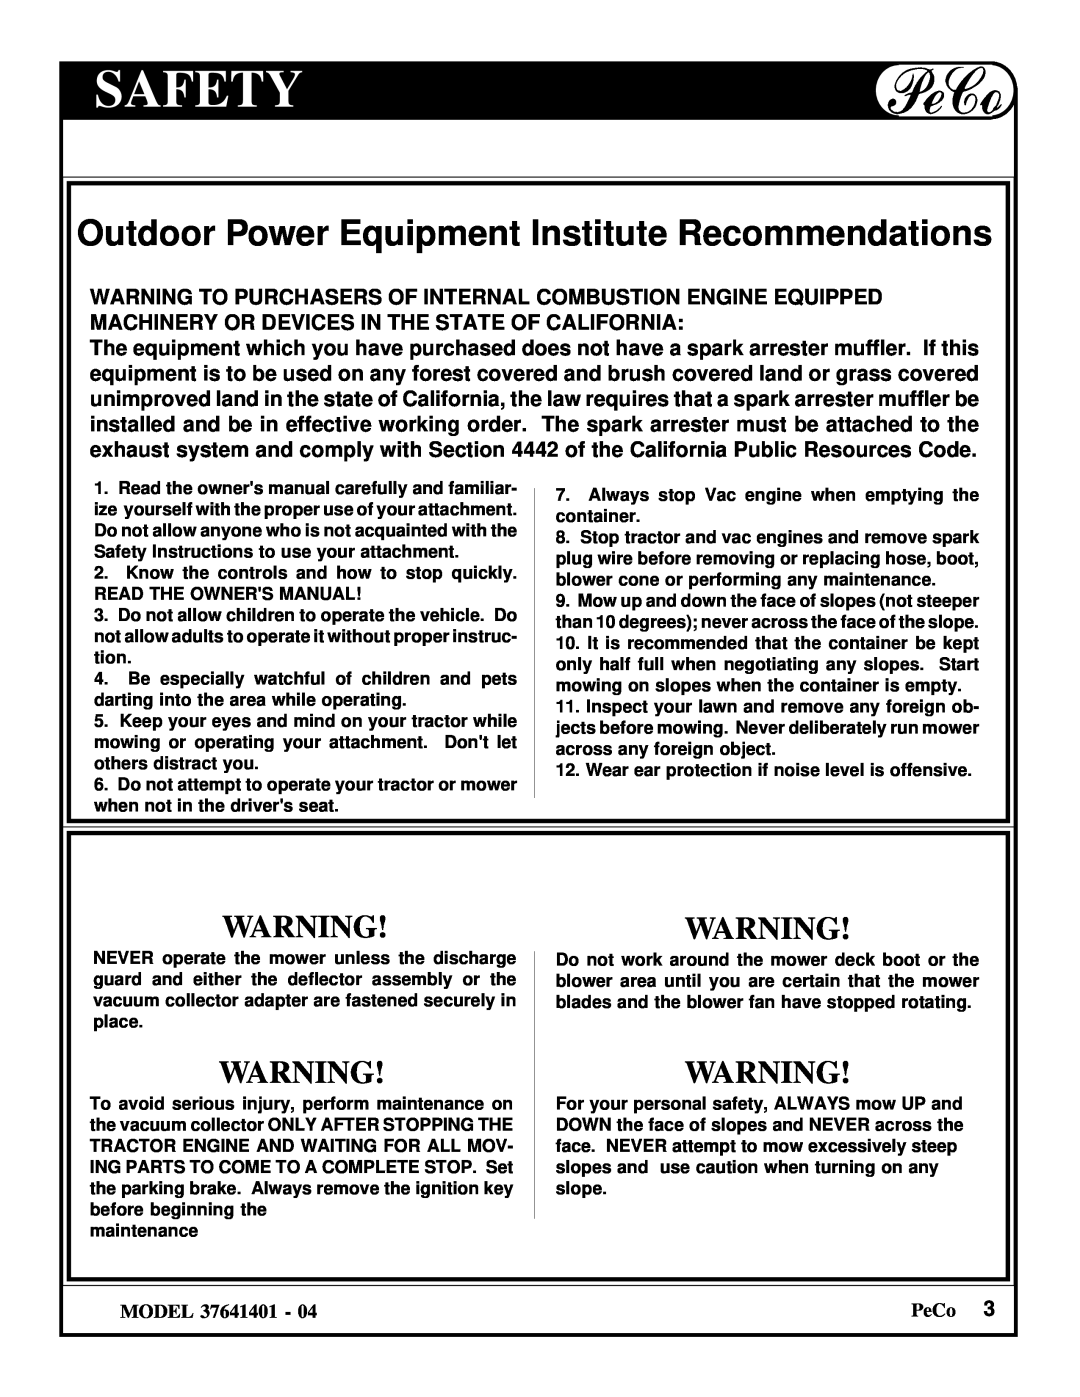 Briggs & Stratton 37641401 owner manual Safety, Outdoor Power Equipment Institute Recommendations 